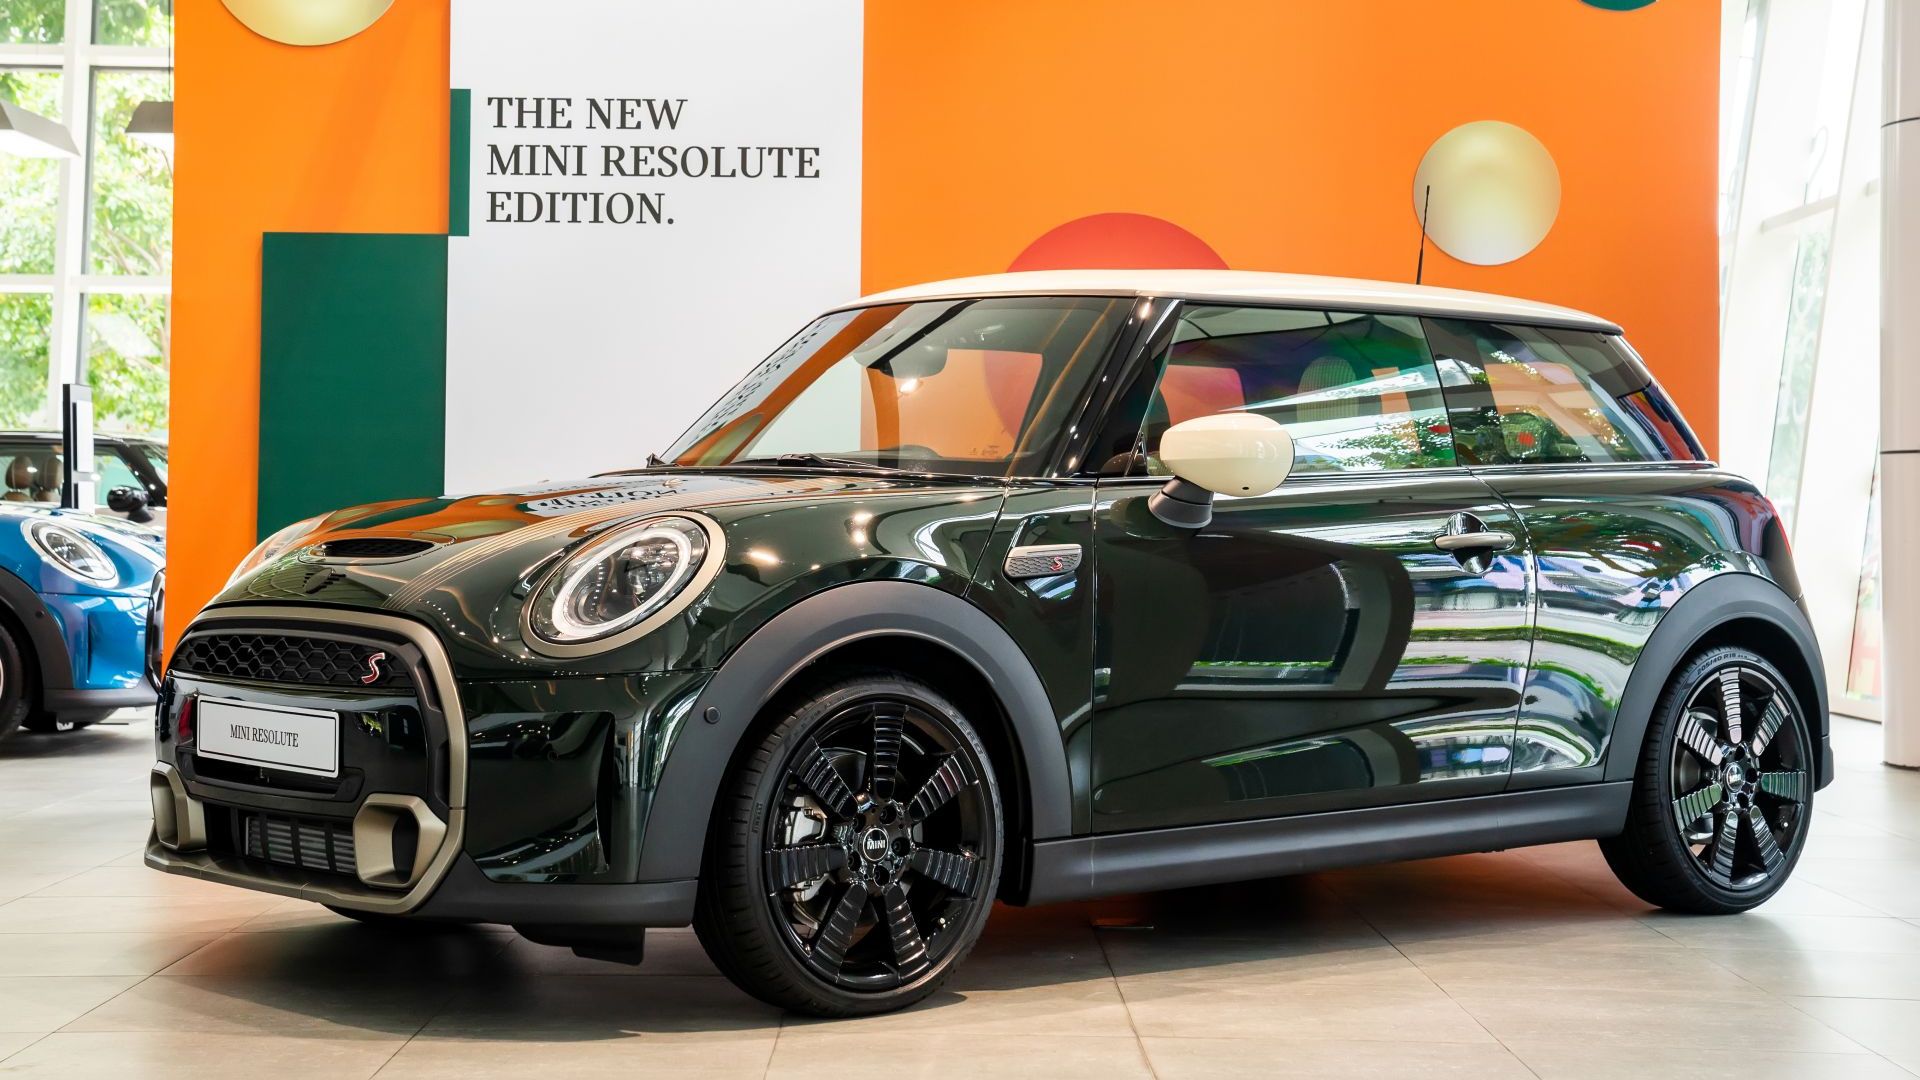 What's so special about MINI Cooper S Resolute Edition at nearly 2.3 billion VND?  - Photo 1.